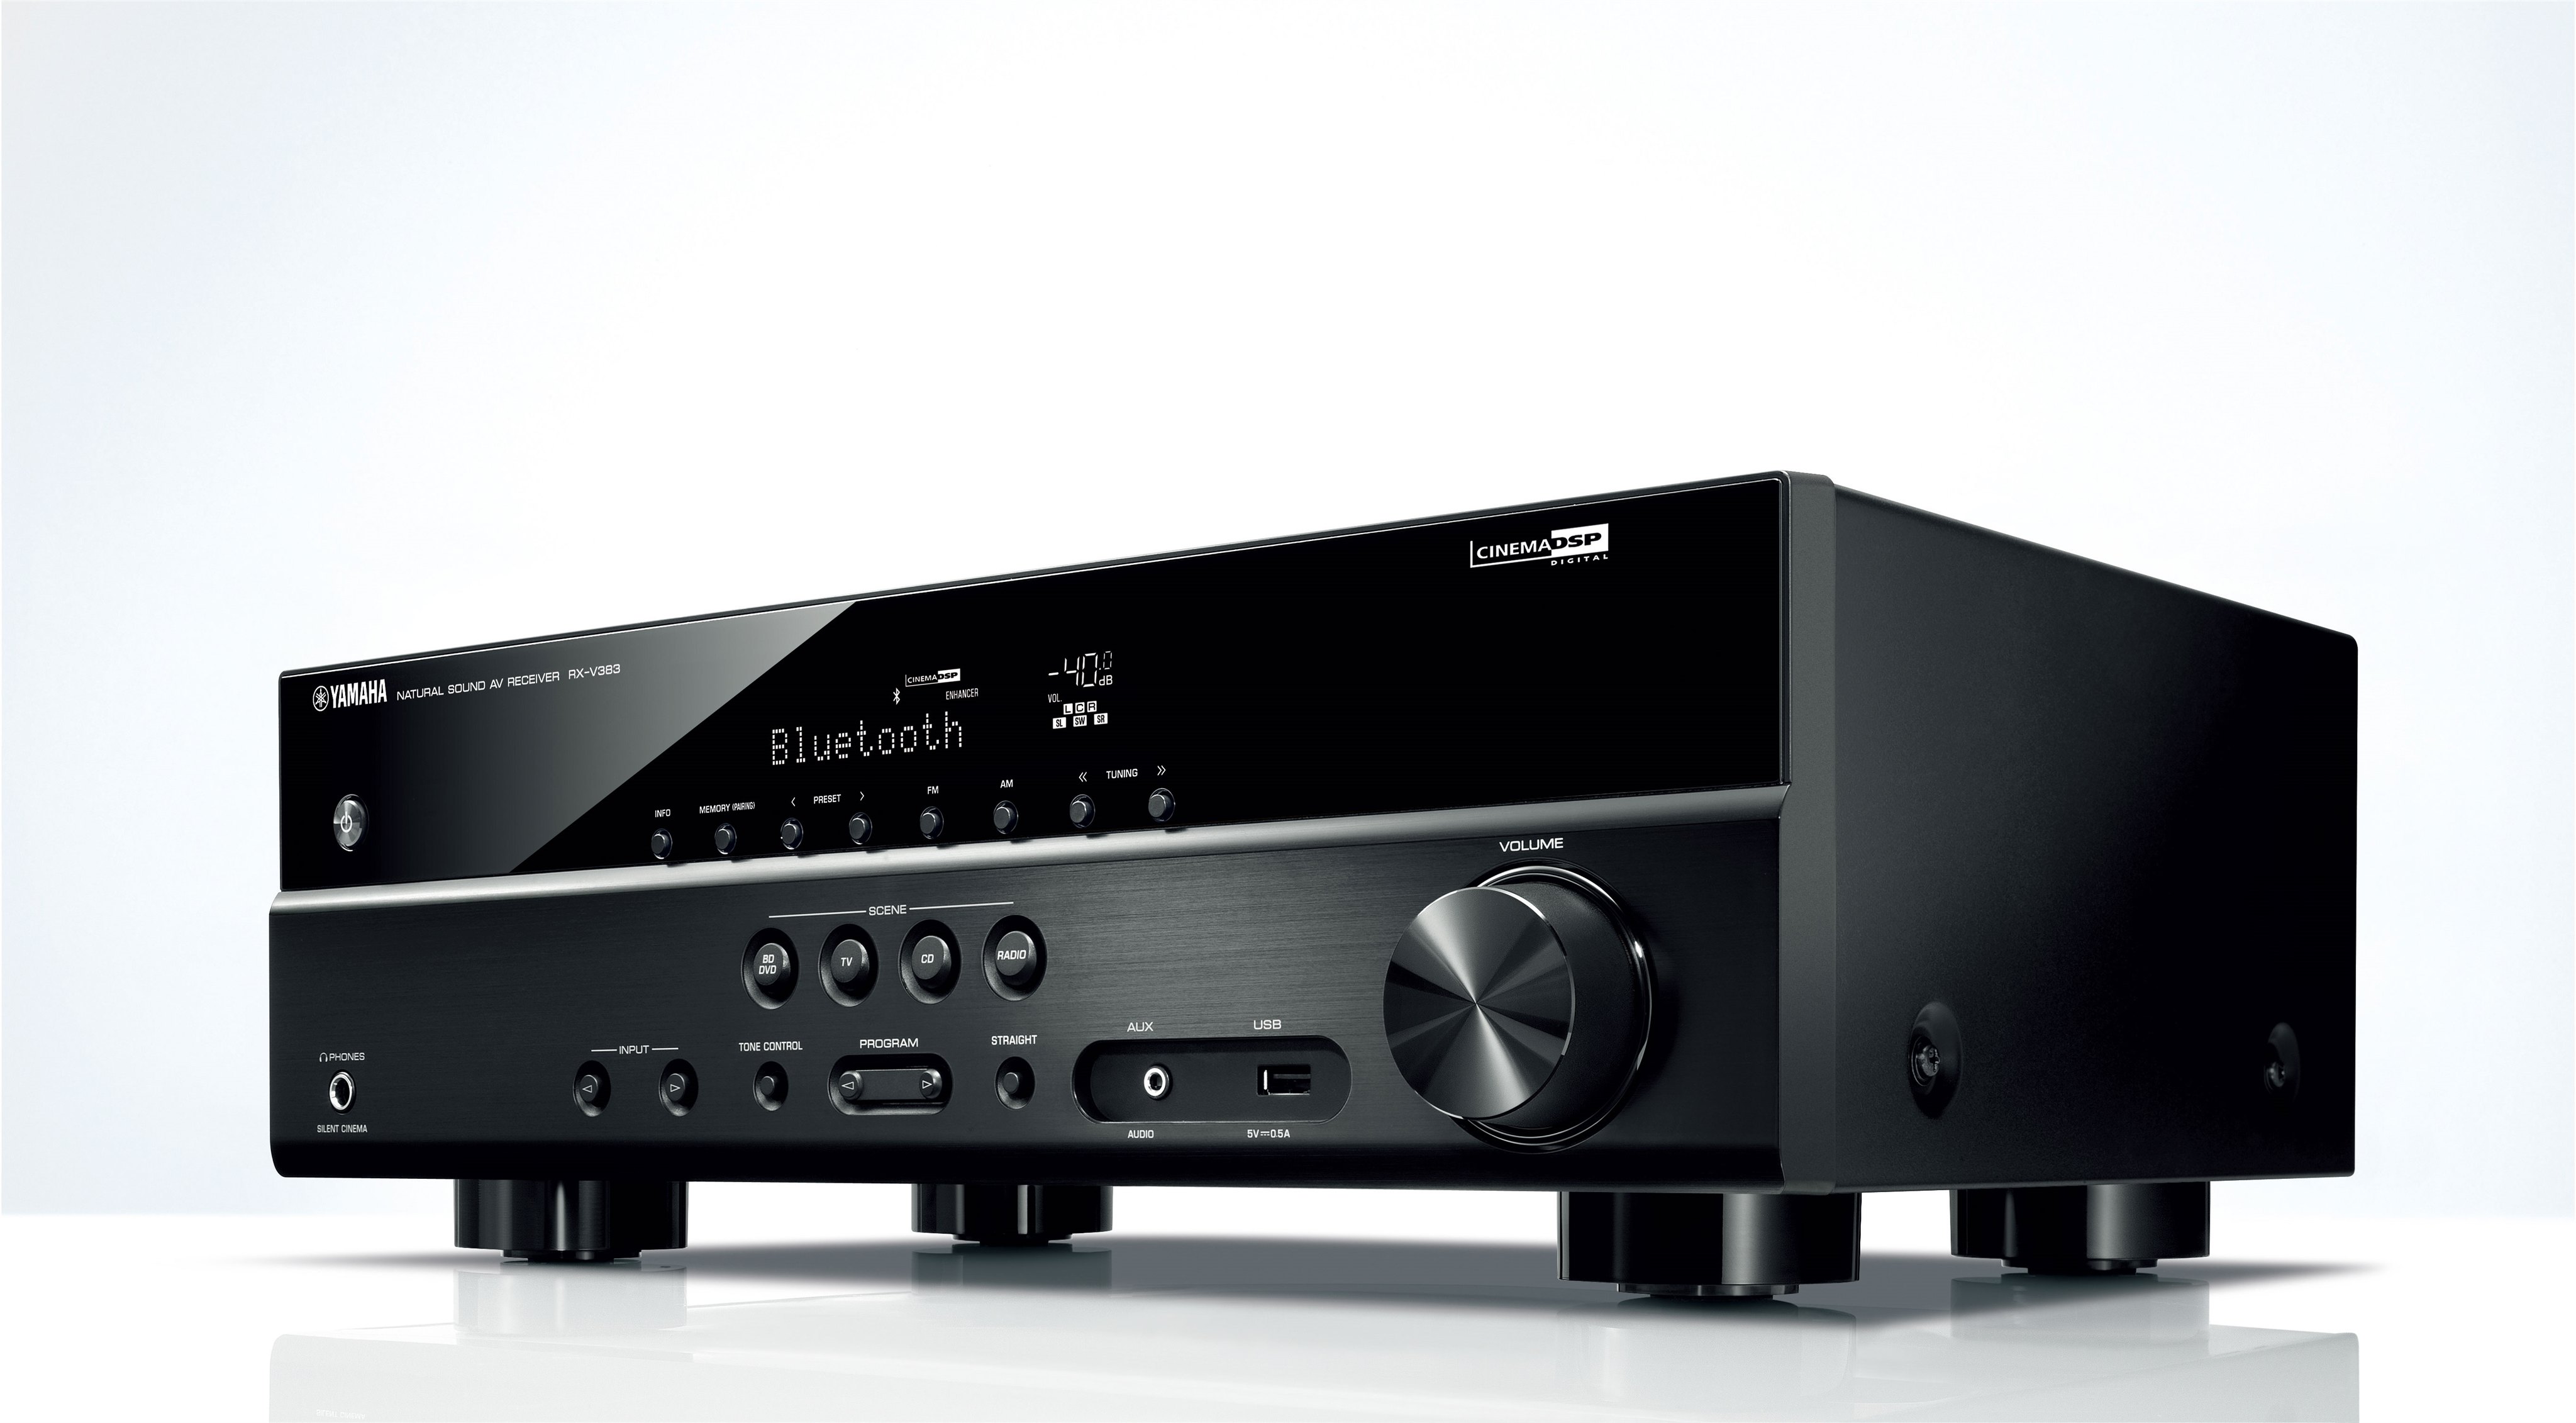 RX-V383 - Overview - AV Receivers - Audio & Visual - Products - Yamaha